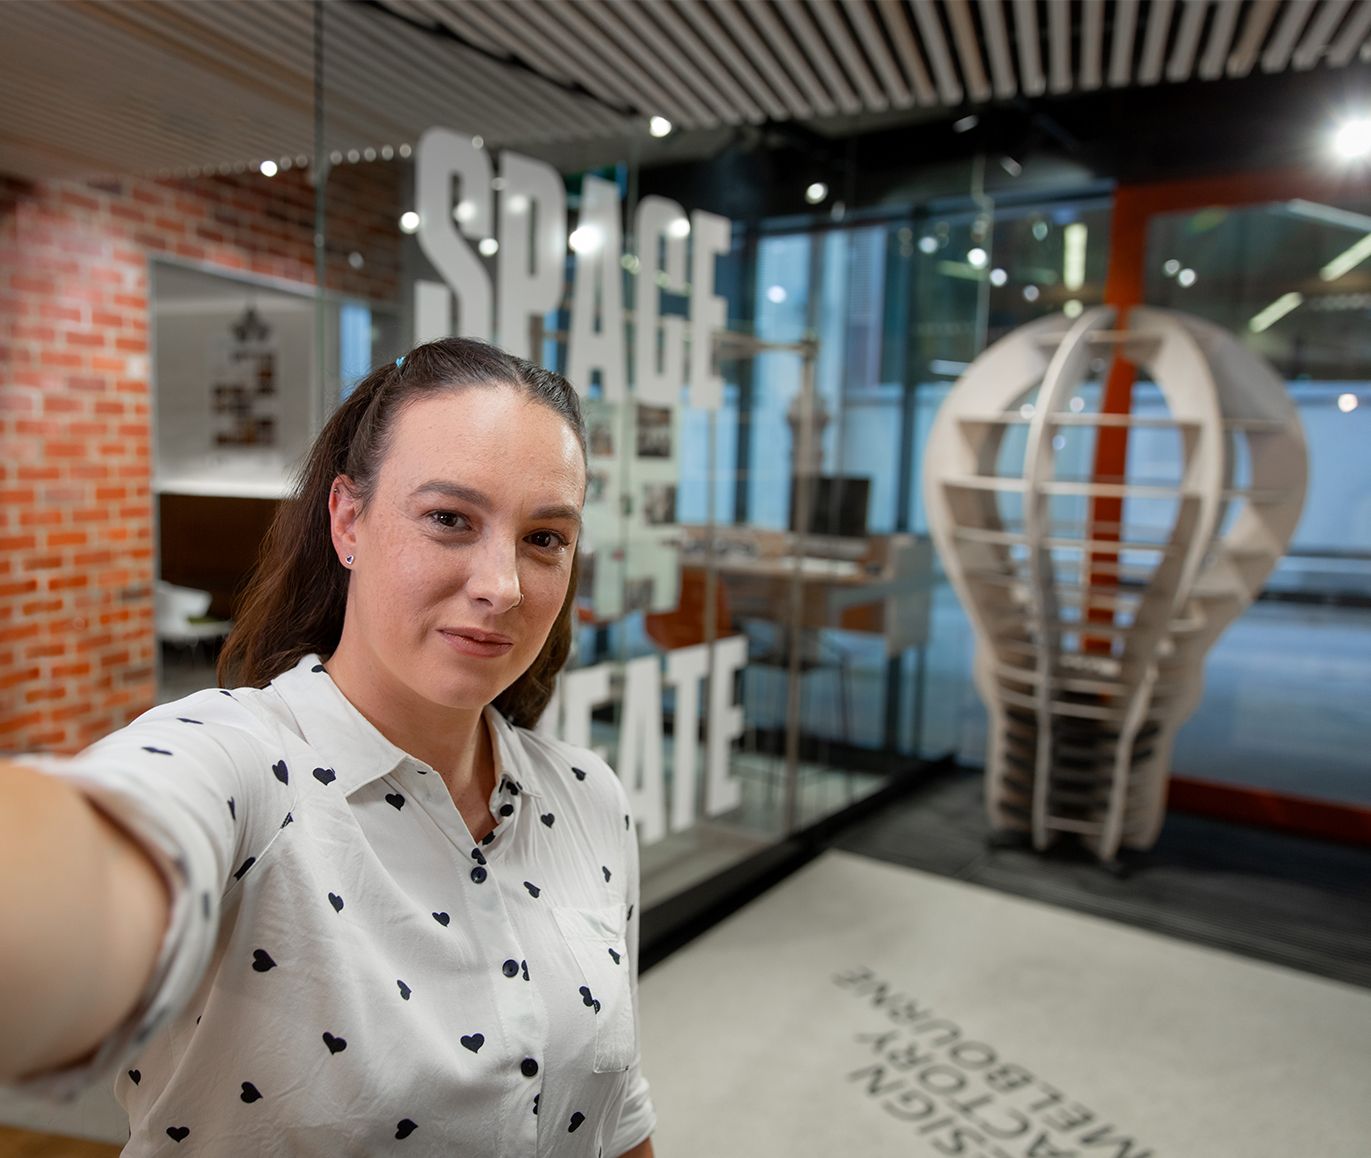 Female student takes a photo in a selfie style shot, smiling at the camera with a Swinburne Hawthorn campus space seen in the background.